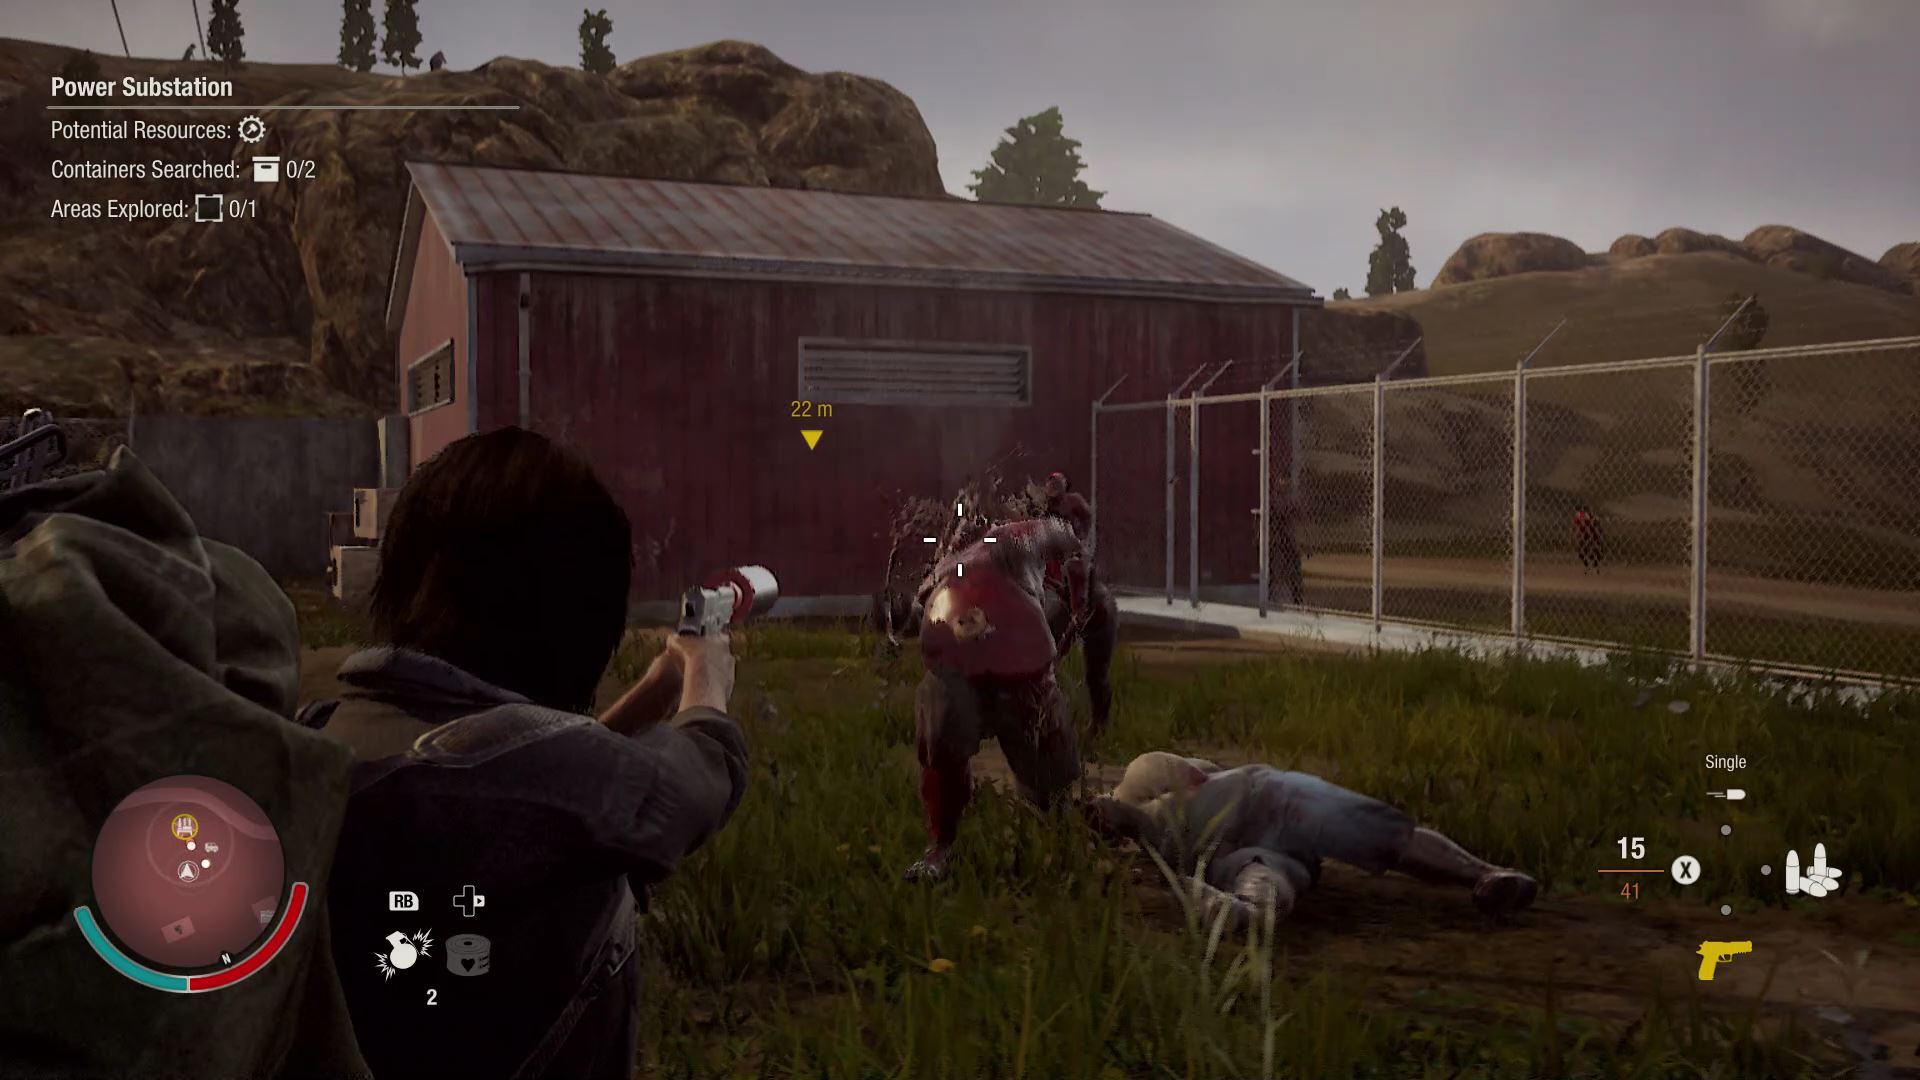 State of Decay 2 gets 25 minutes of new co-op gameplay - MSPoweruser